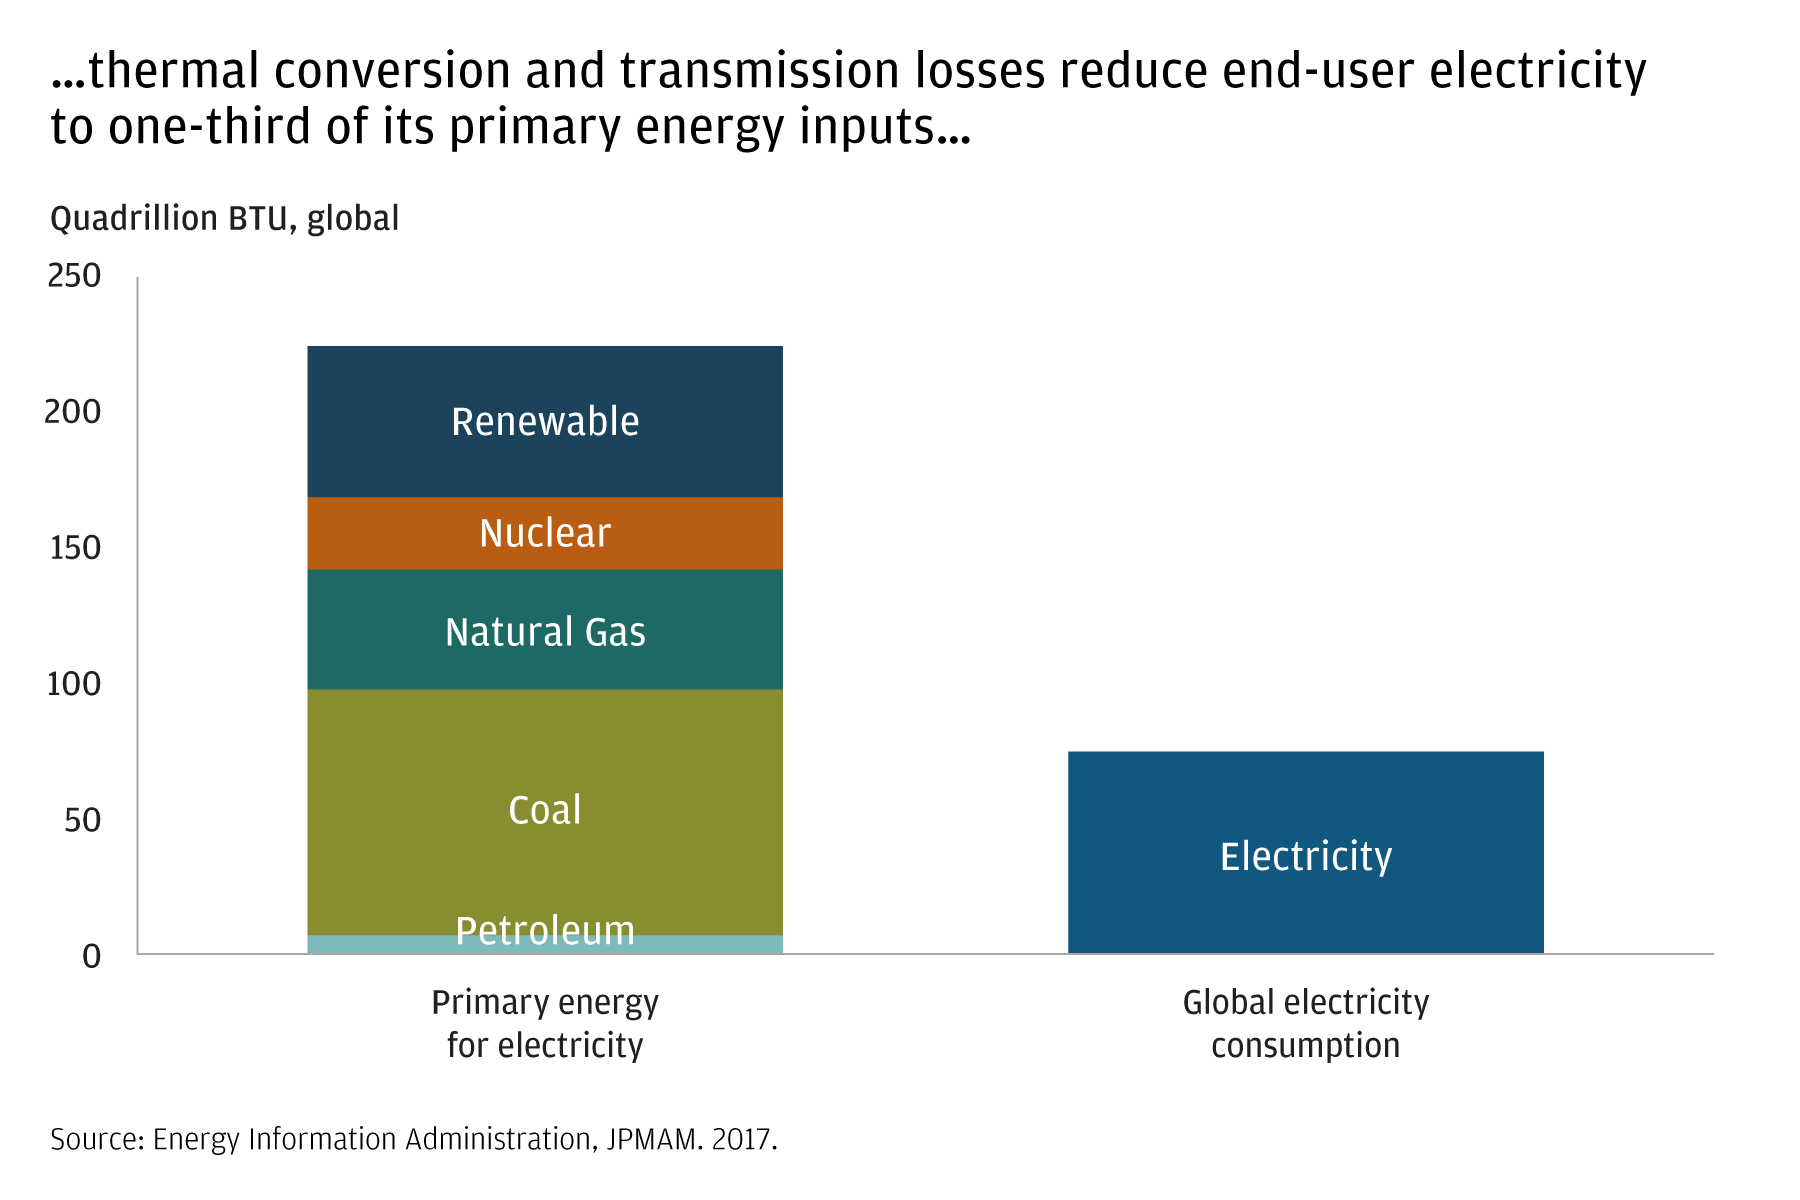 These side-by-side bar charts show the amount of electricity-generating energy lost to thermal conversion, power plant consumption and transmission. End-user electricity represents only about 1/3 of its primary energy inputs. 